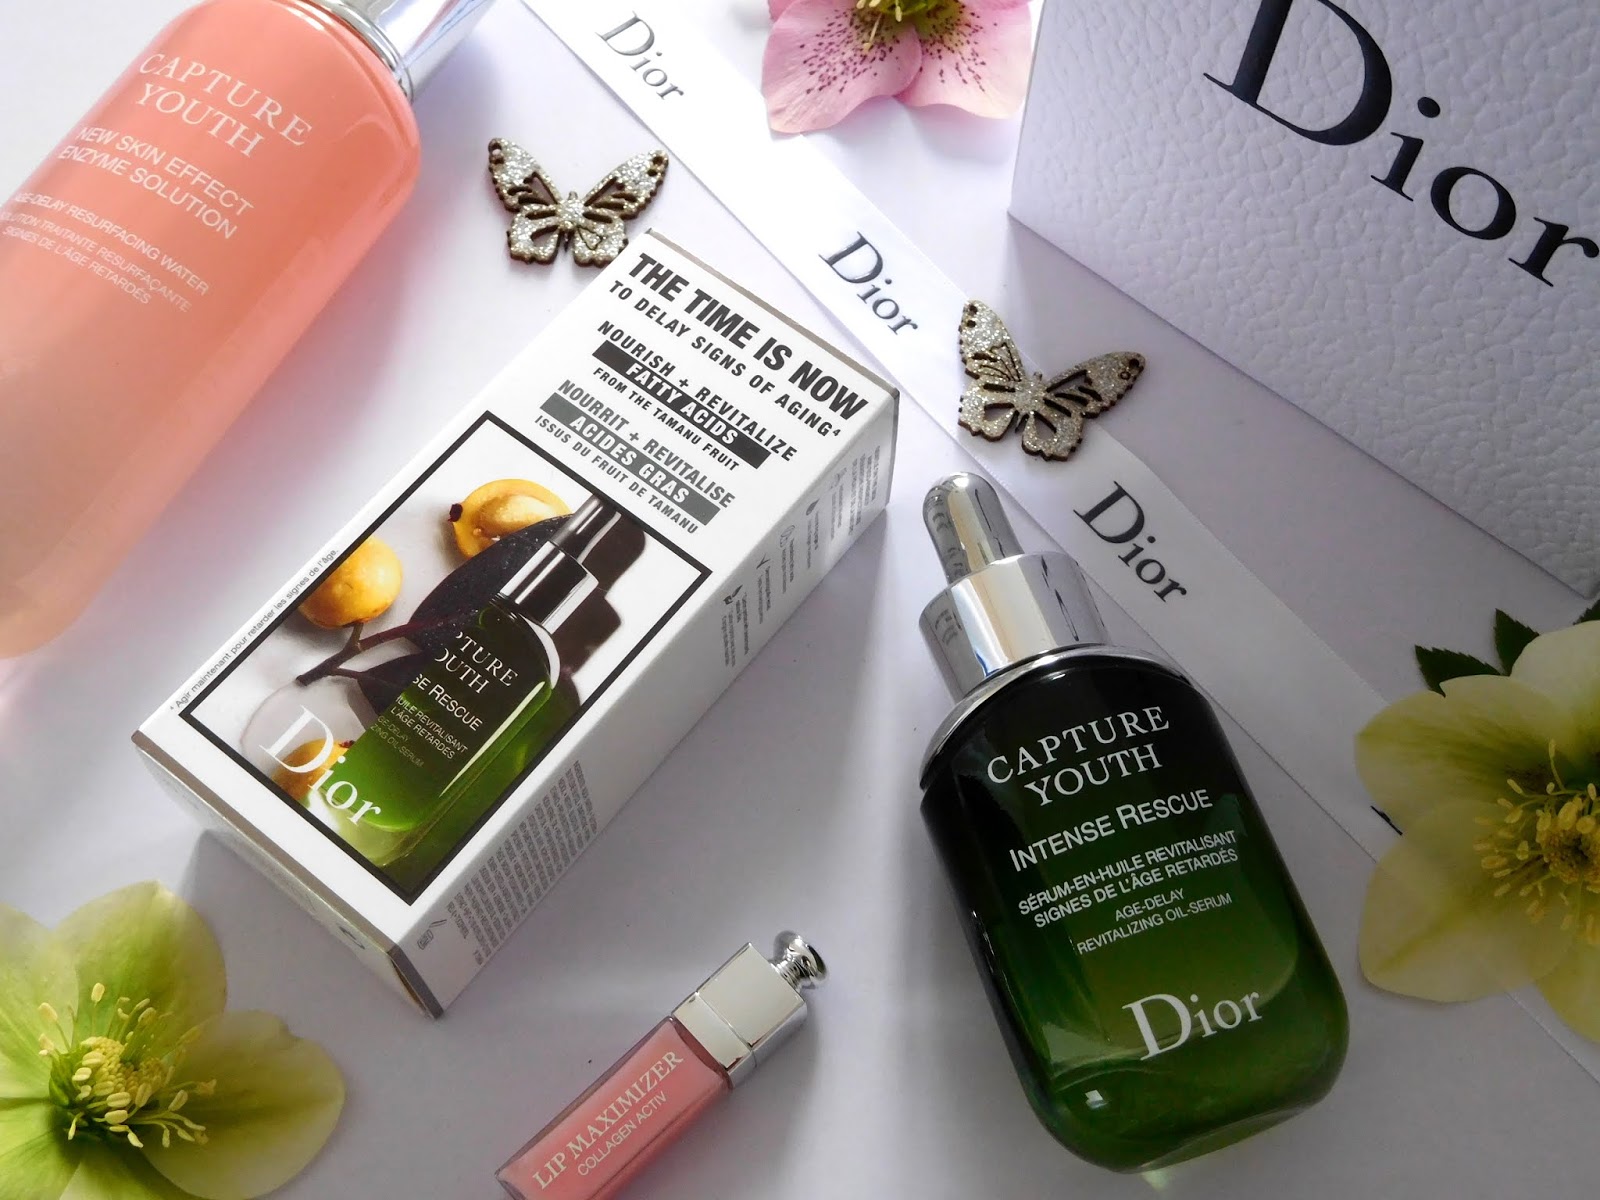 dior capture youth intense rescue